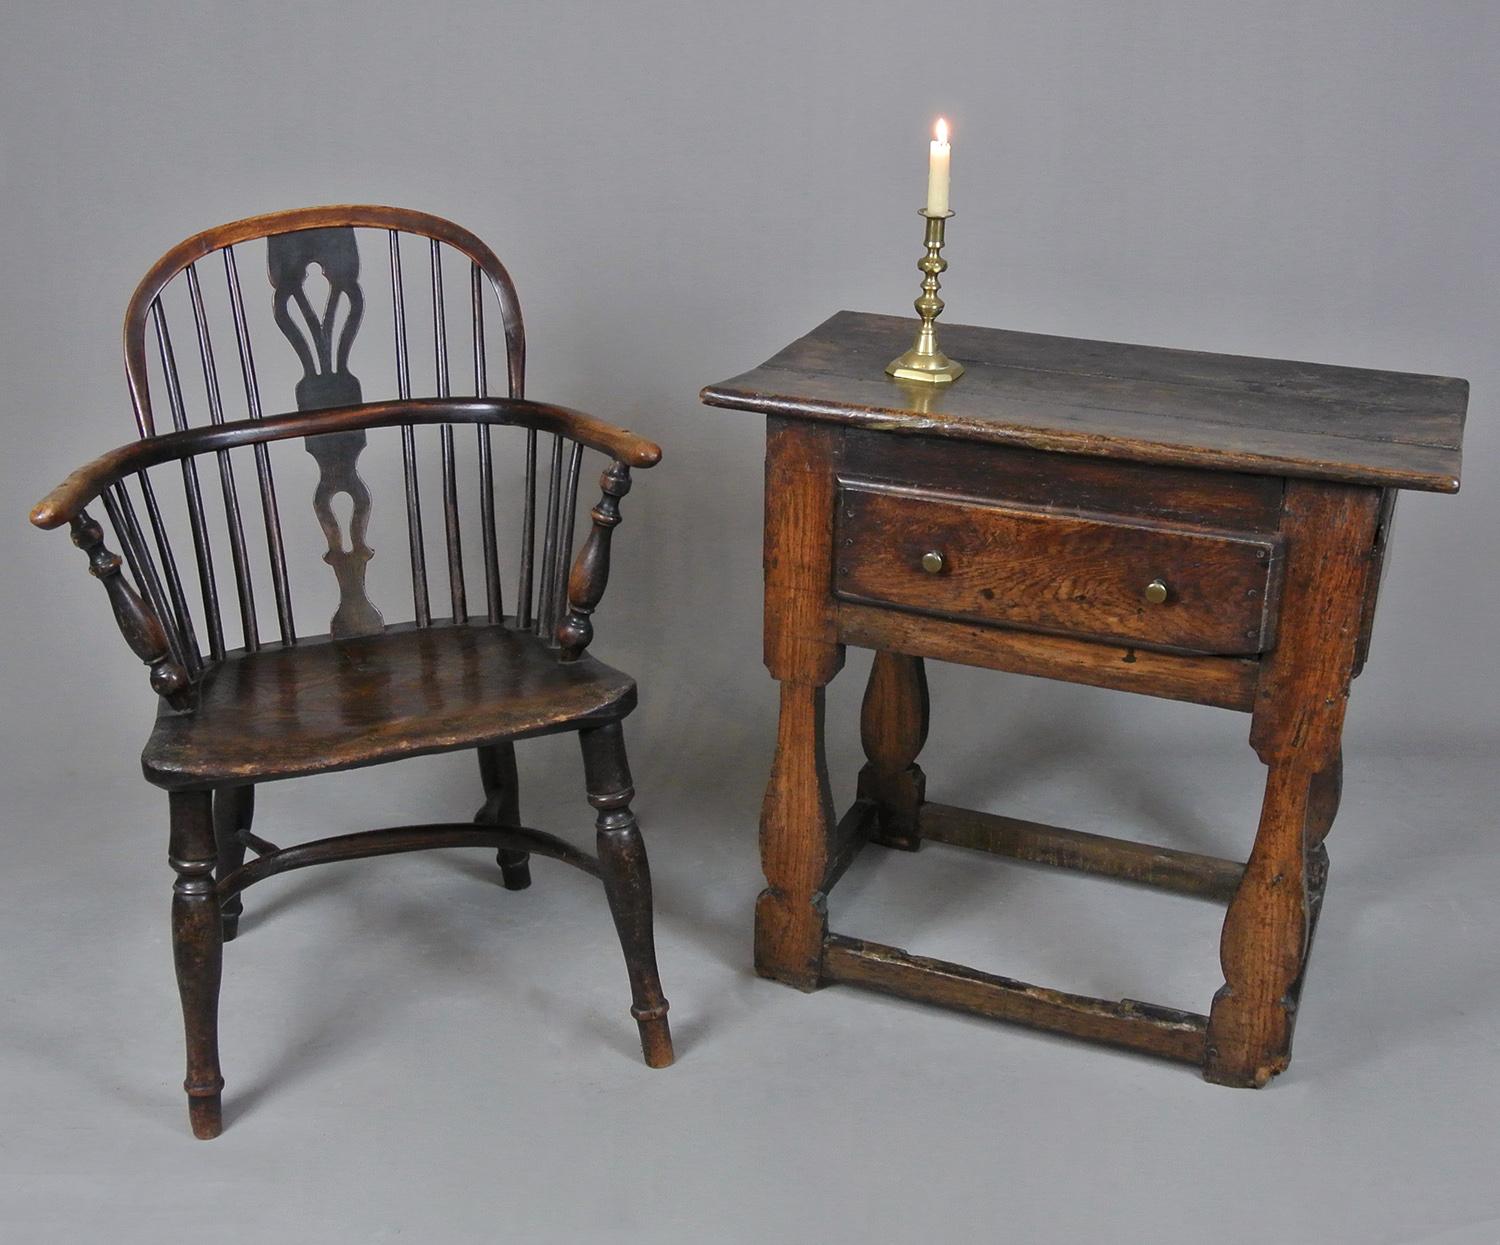 A rare and beautiful small oak and elm tavern table, peg jointed throughout and with lovely shaped supports united by a box stretcher. The drawer original also with a thickly hewn oak lining and nailed up bottom. The three boarded weather top with a